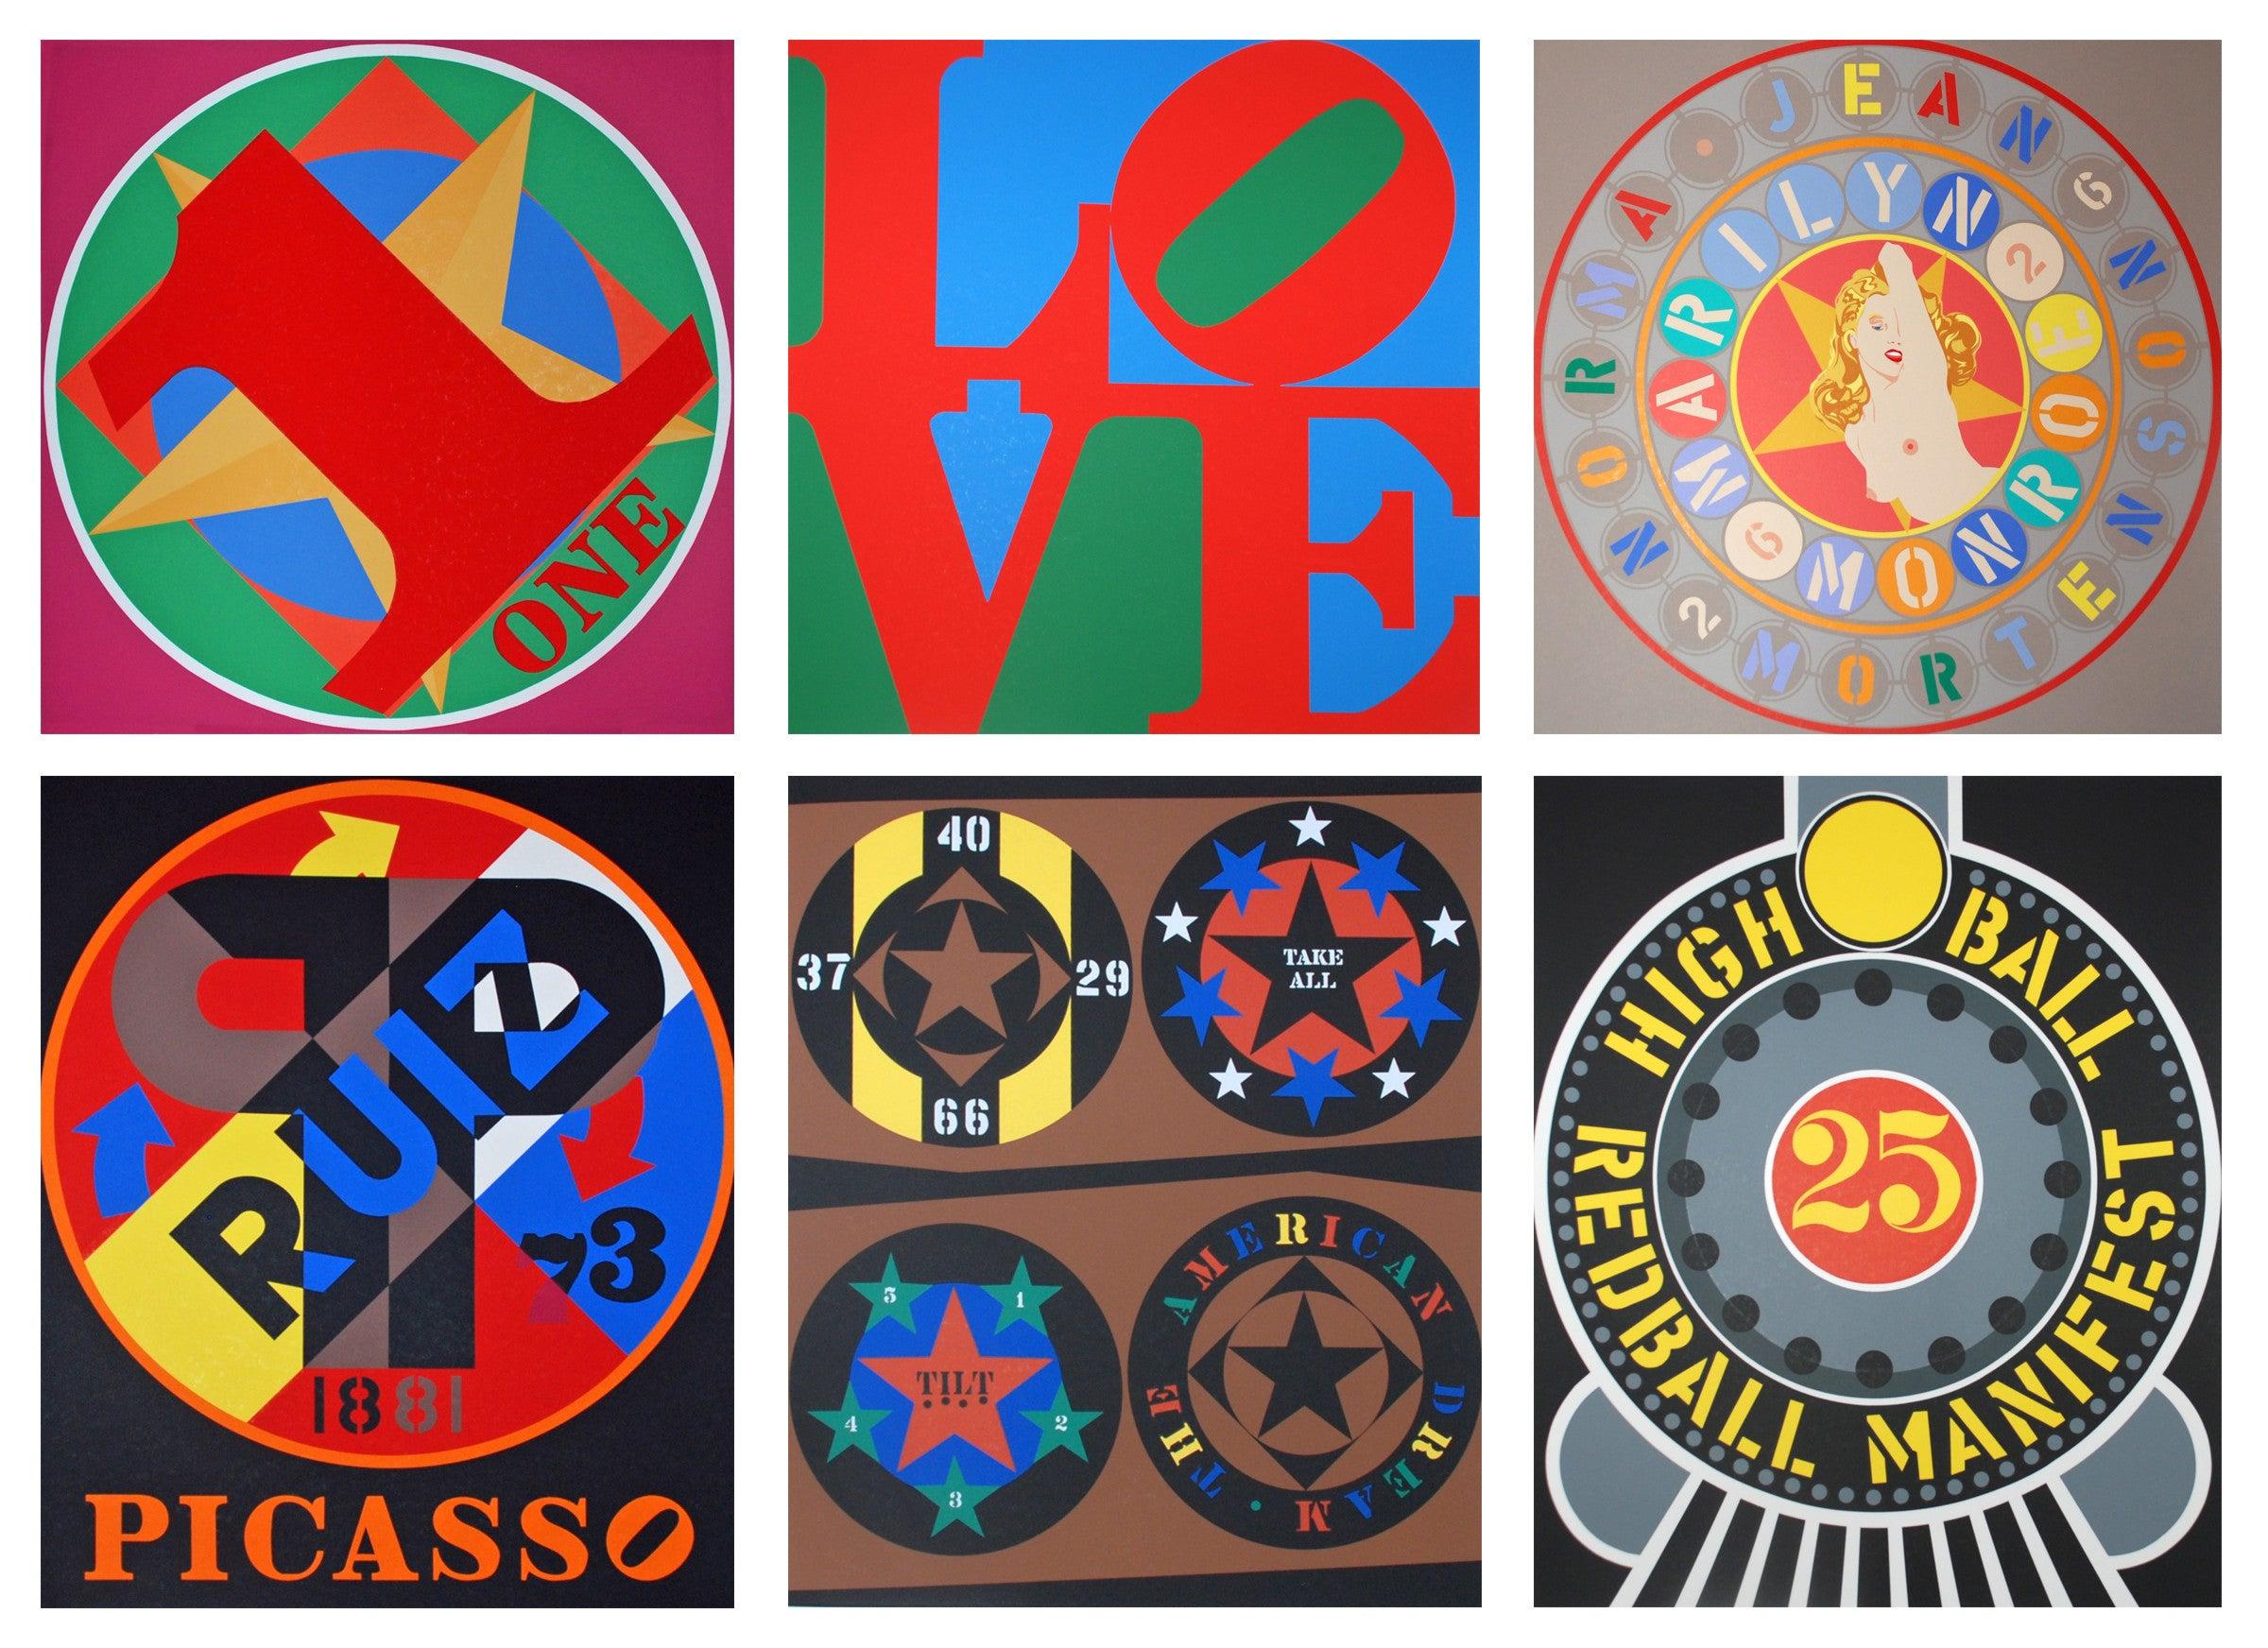 Artist: Robert Indiana
Title: One Indiana Square, Love, The Metamorphosis of Norma Jean Mortensen, Picasso, The American Dream, Highball on the Redball Manifest
Portfolio: The American Dream
Medium: Six original serigraphs
Year: 1997
Edition: PP